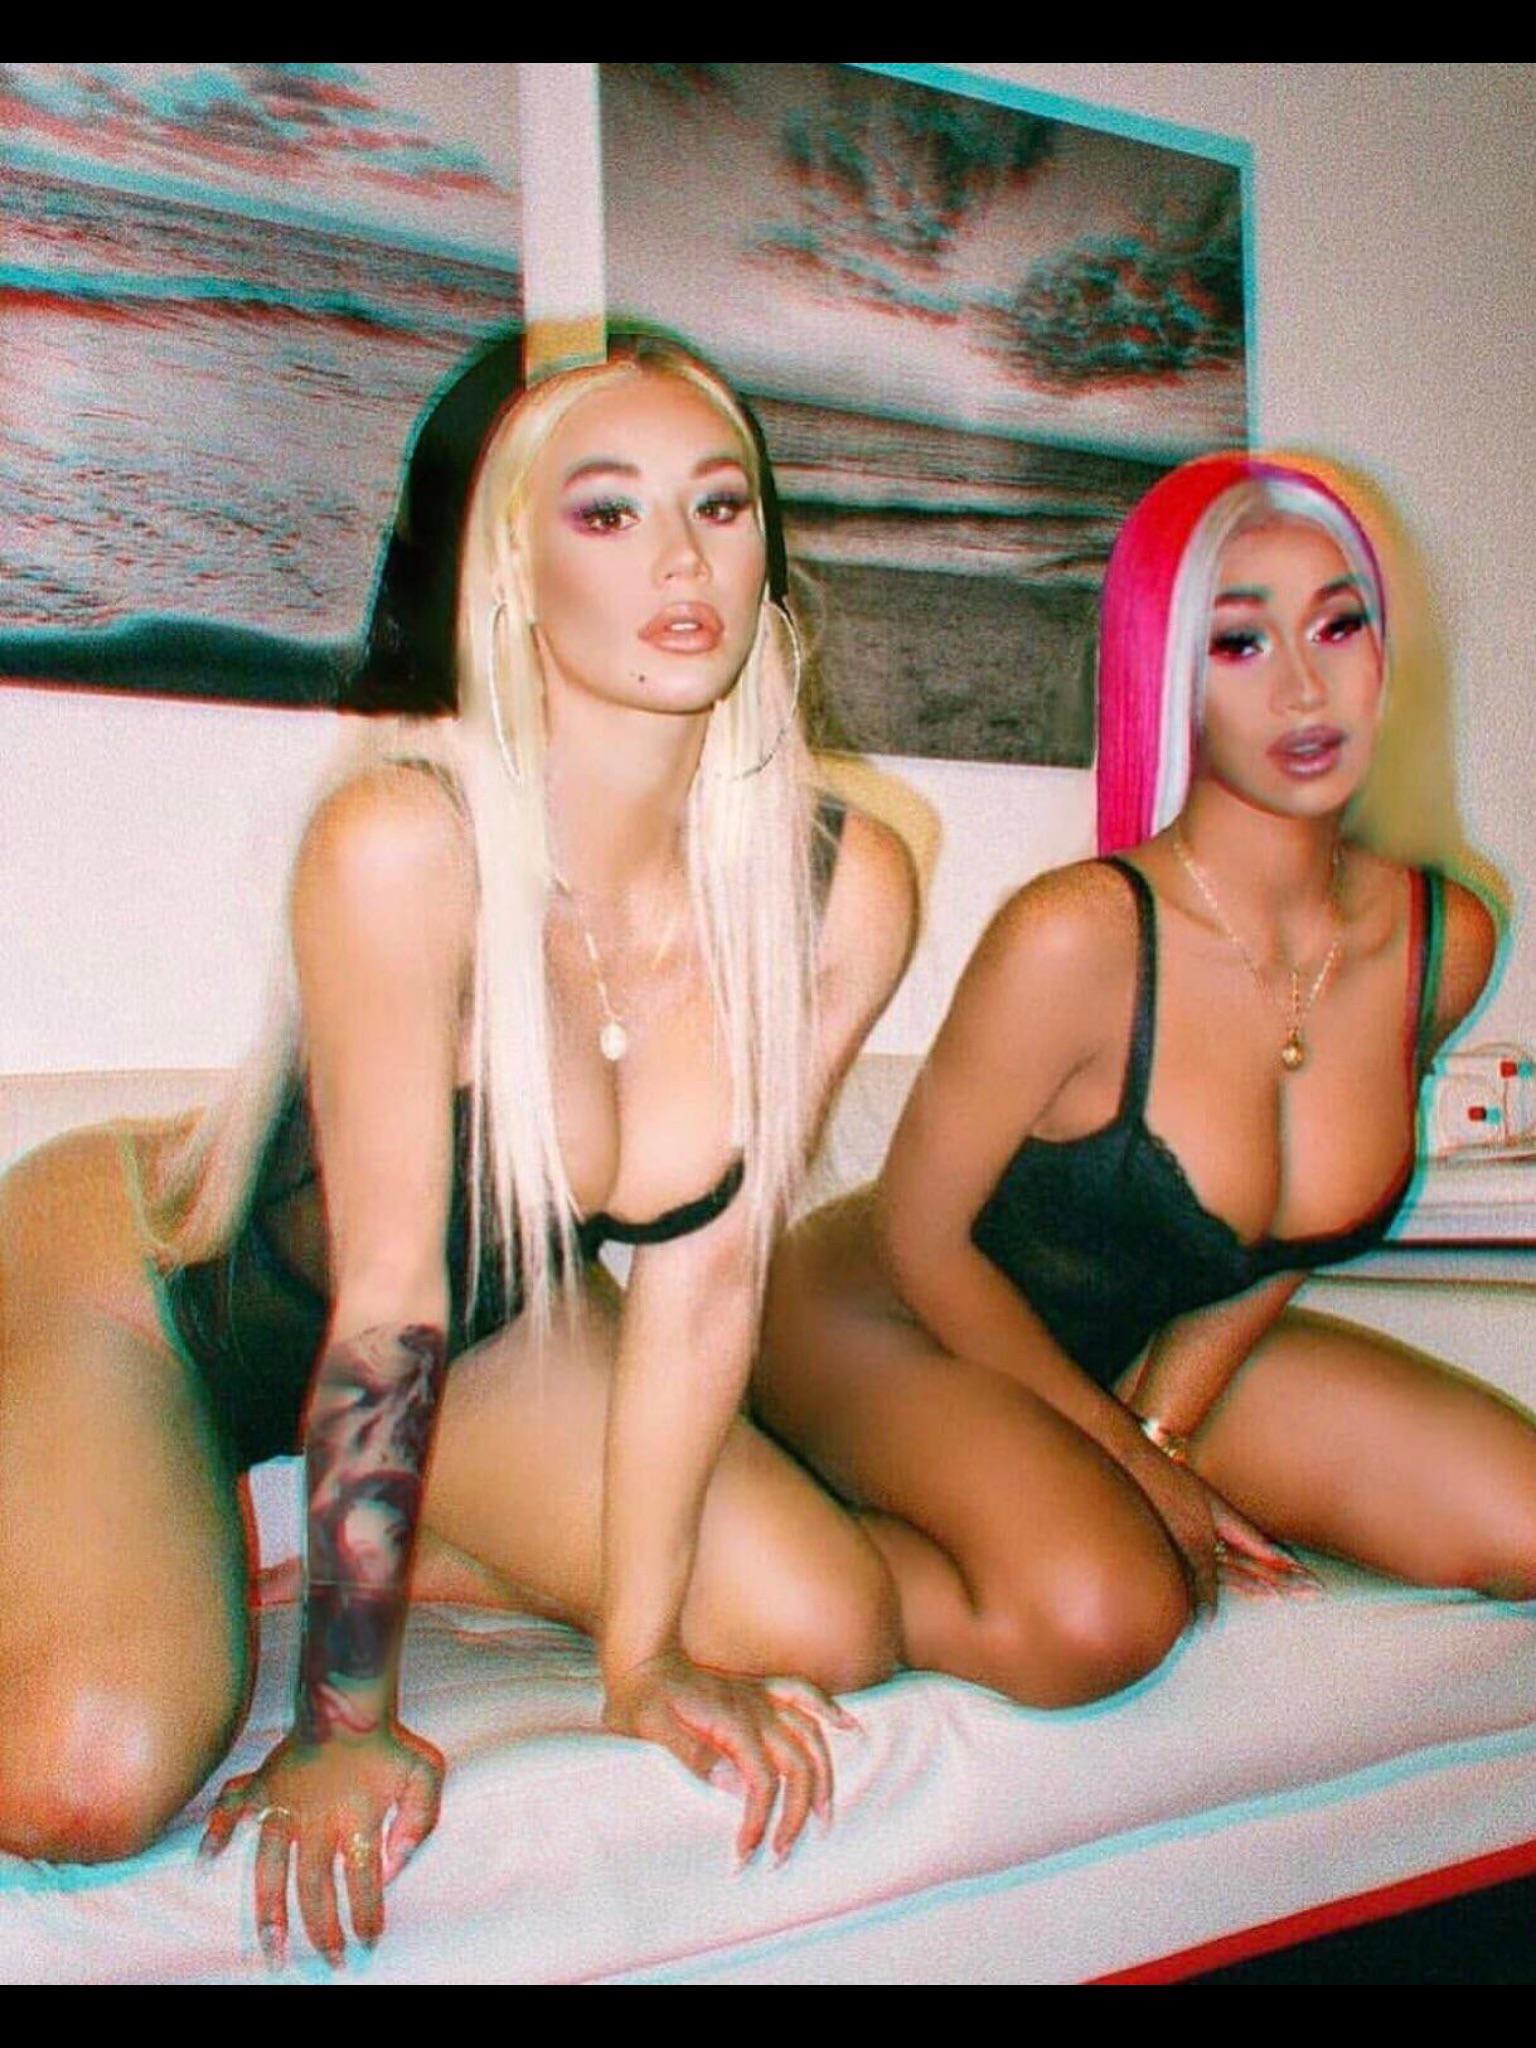 Iggy Azalea and Cardi B are rich and famous strictly